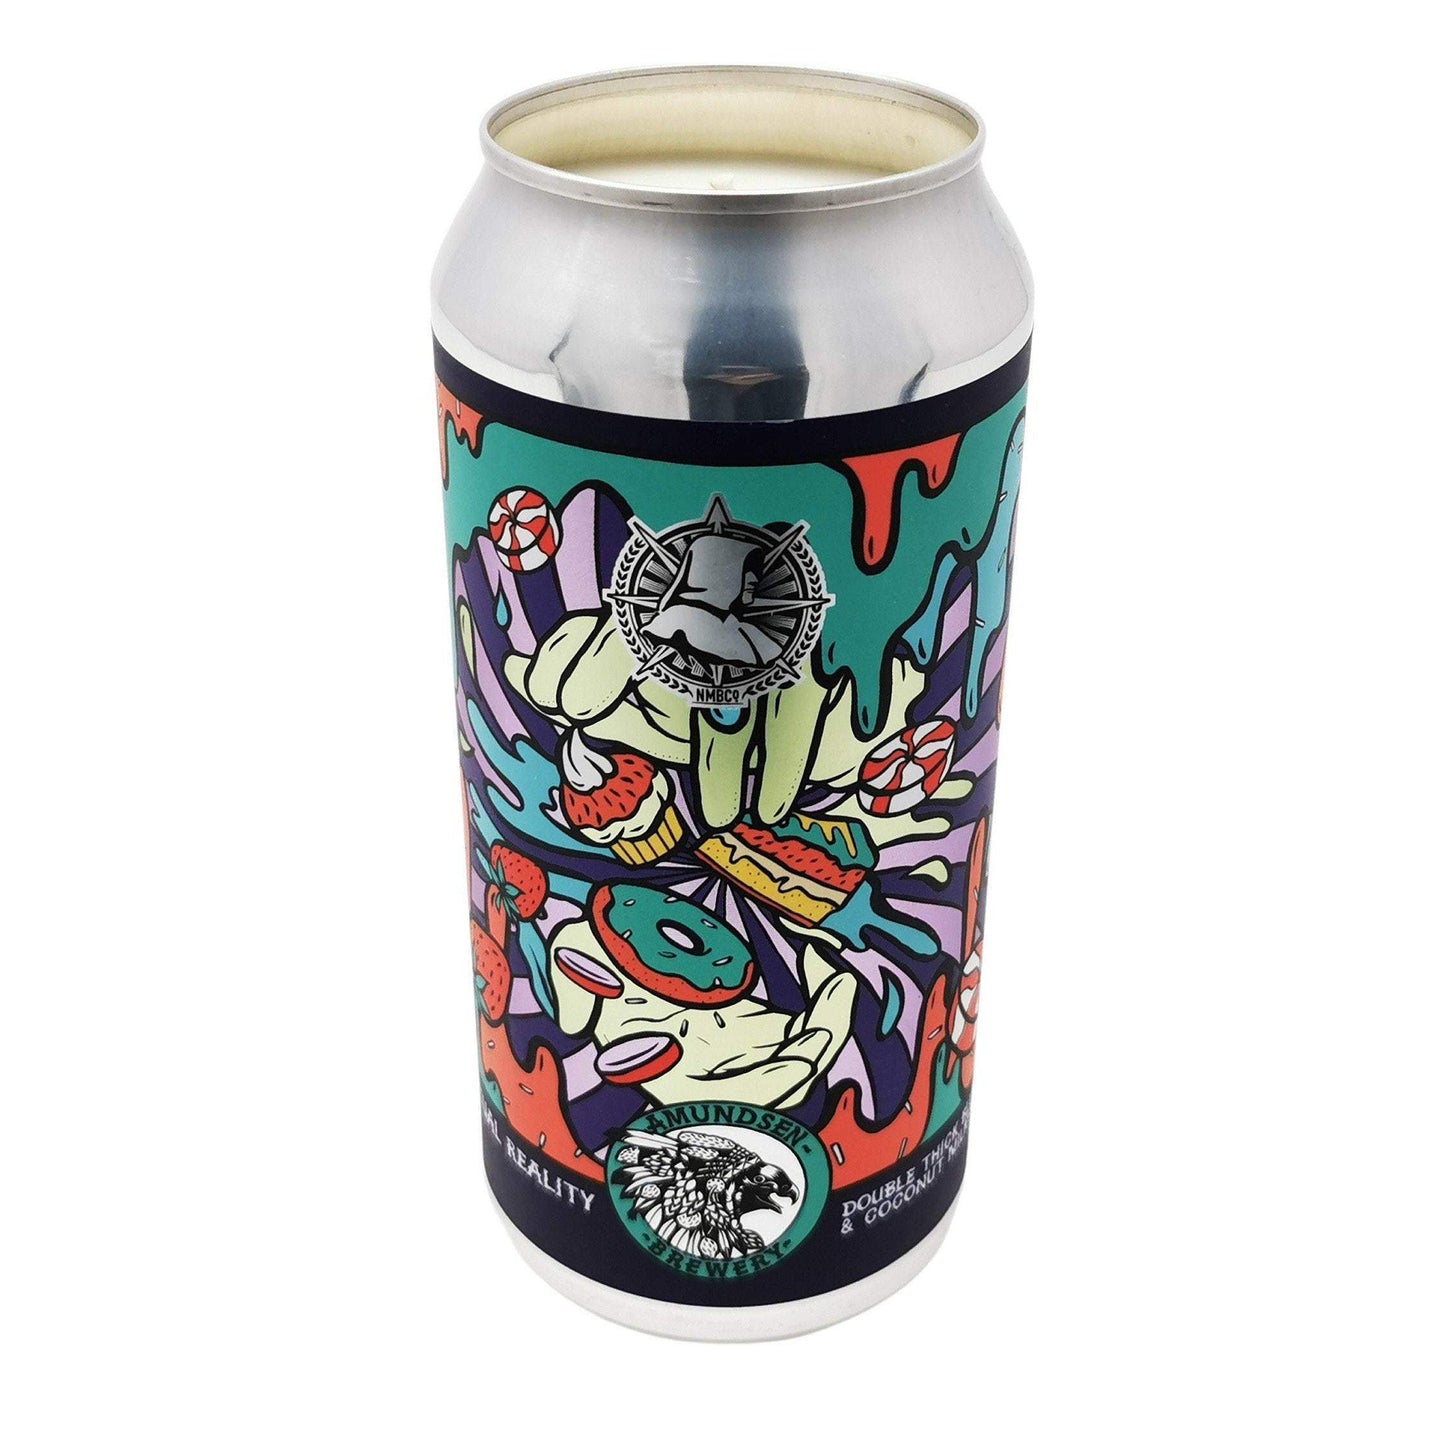 Amundsen & Northern Monk Virtual Reality Craft Beer Can Candle Beer Can Candles Adhock Homeware